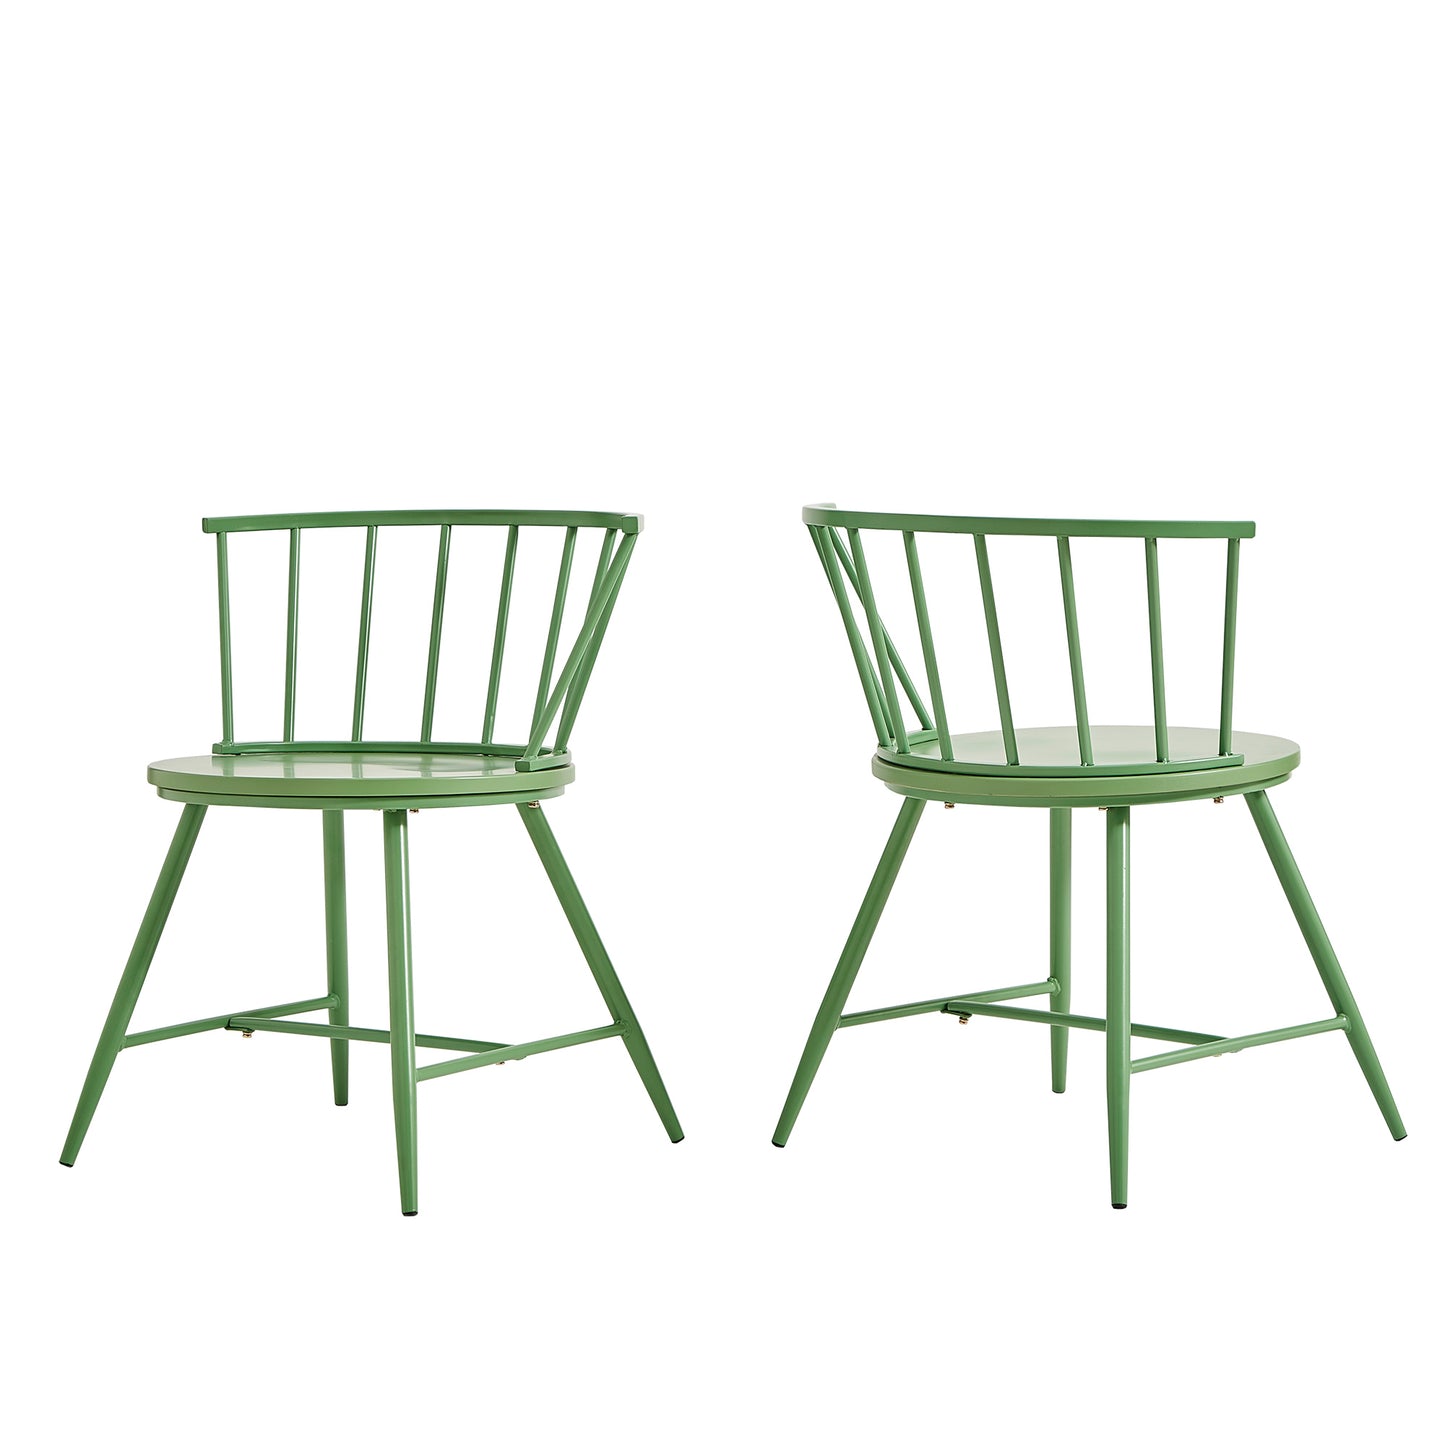 Low Back Windsor Classic Dining Chairs (Set of 2) - Meadow Green